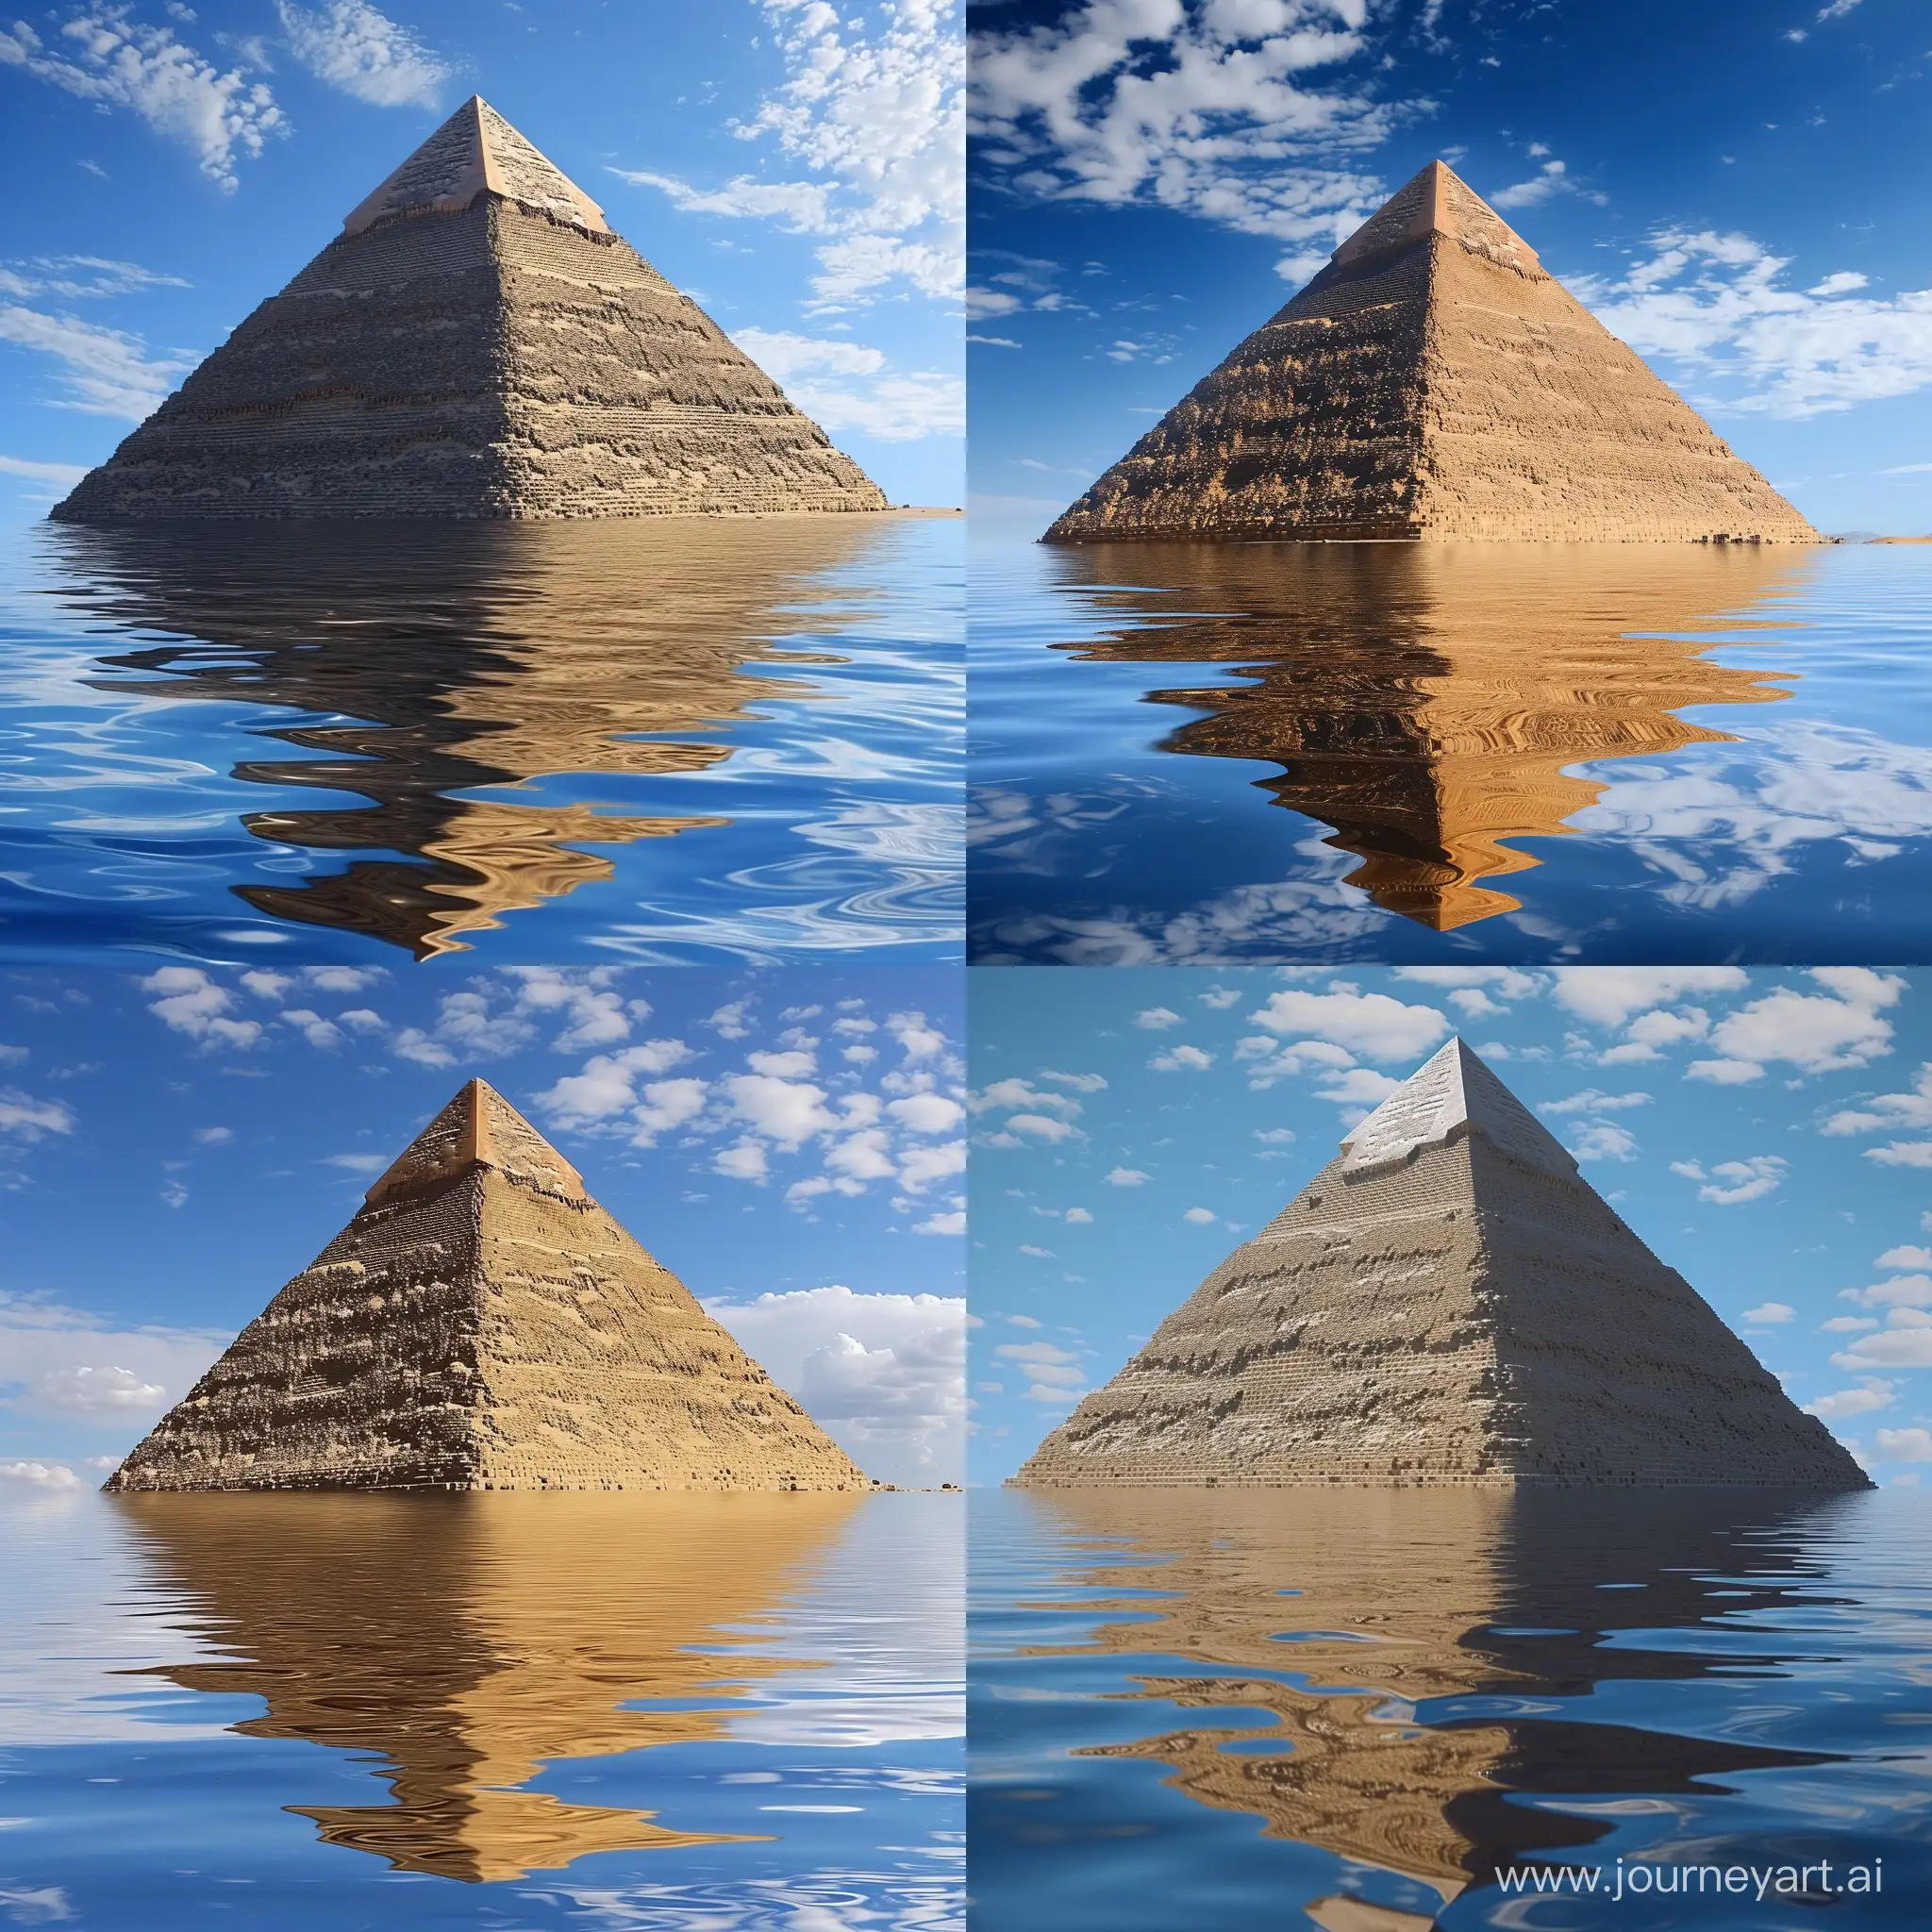 hyper image of an egyptian pyramid sitting under the blue sky and reflected by the water under it. 
